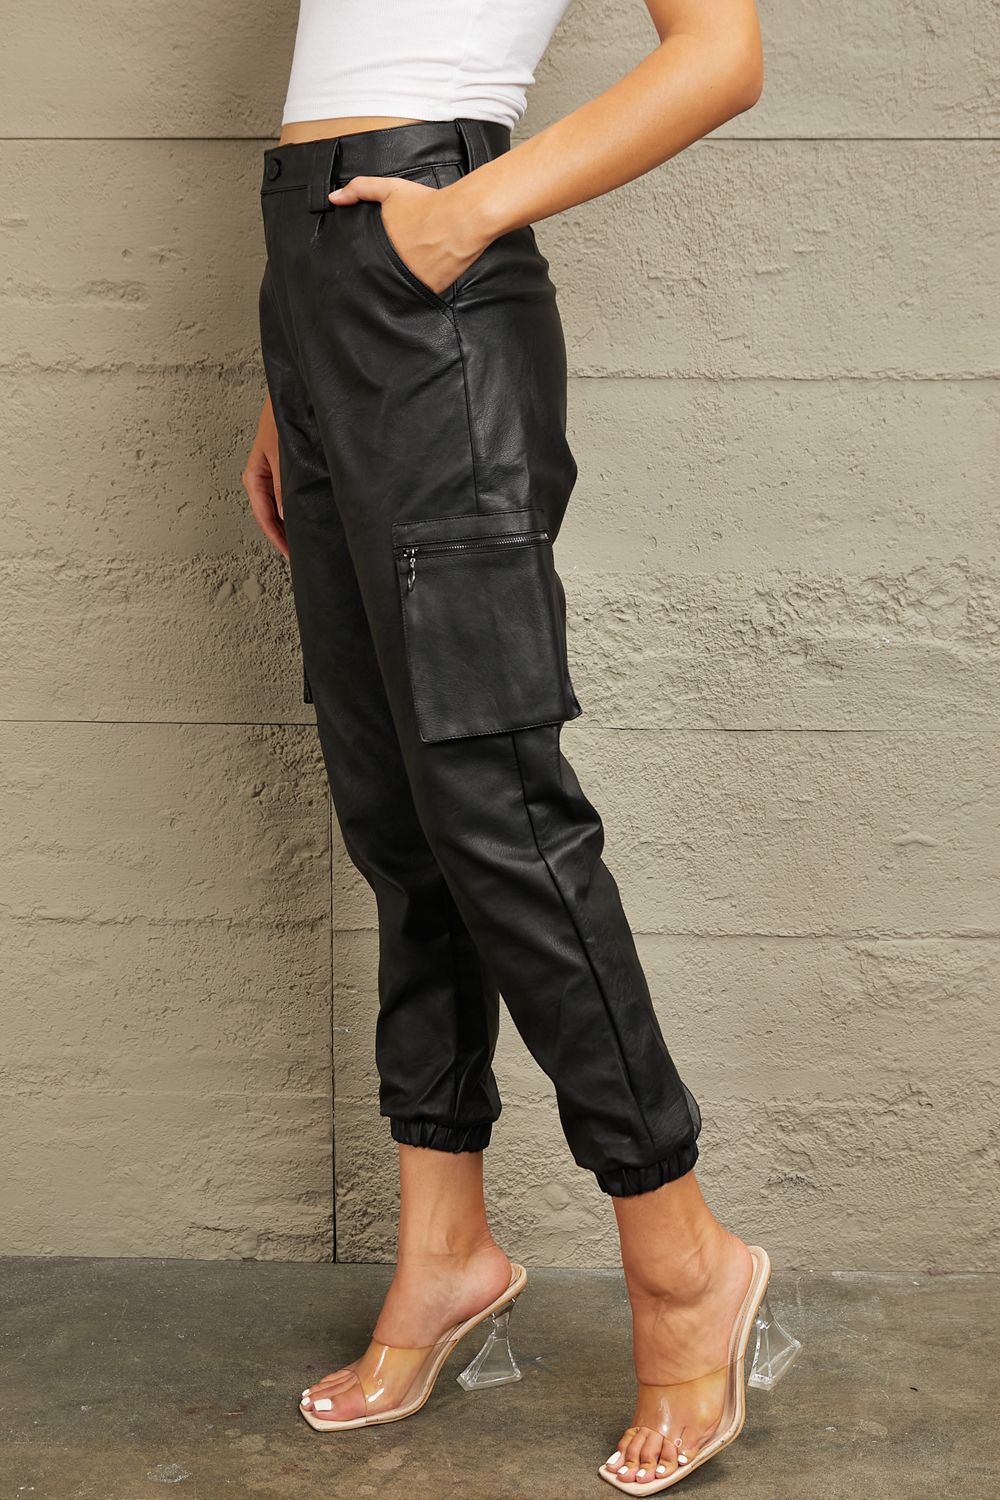 These joggers boast a high-rise waist that flatters your silhouette and provides a comfortable fit. The luxurious leather adds a touch of edge to your ensemble, whether you're dressing up for a night out or adding a chic twist to your everyday look. With a relaxed jogger silhouette and a high-fashion edge, these leather joggers are a versatile must-have for any fashion-forward wardrobe.